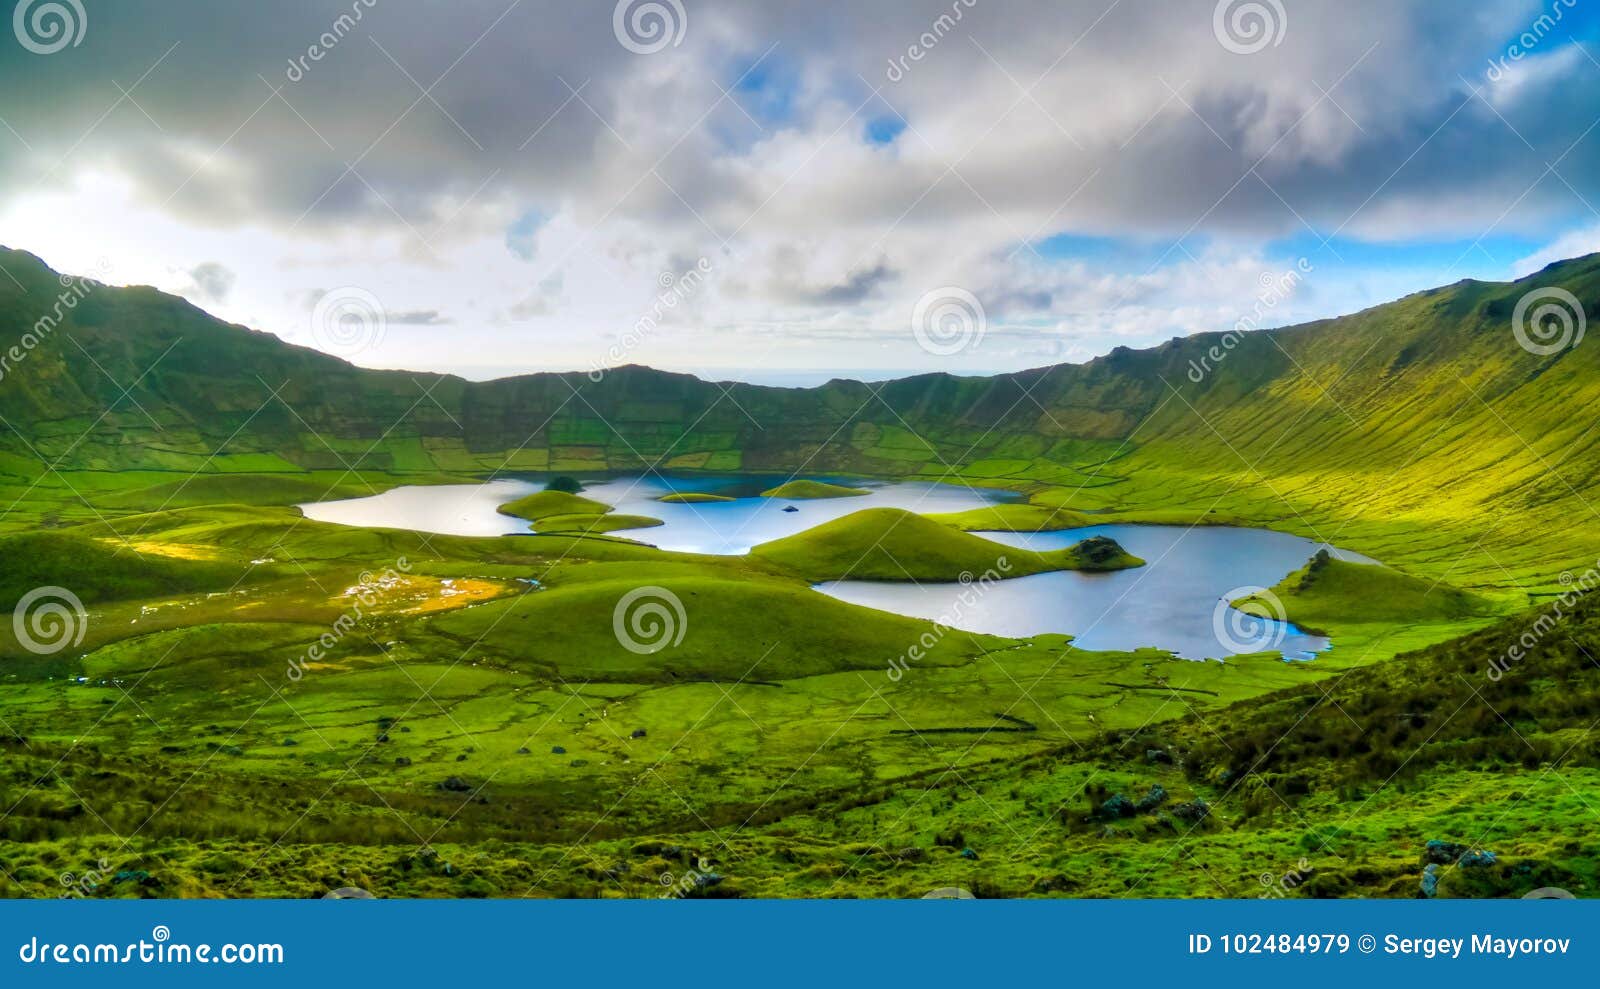 landscape sunset view to caldeirao crater, corvo island, azores, portugal